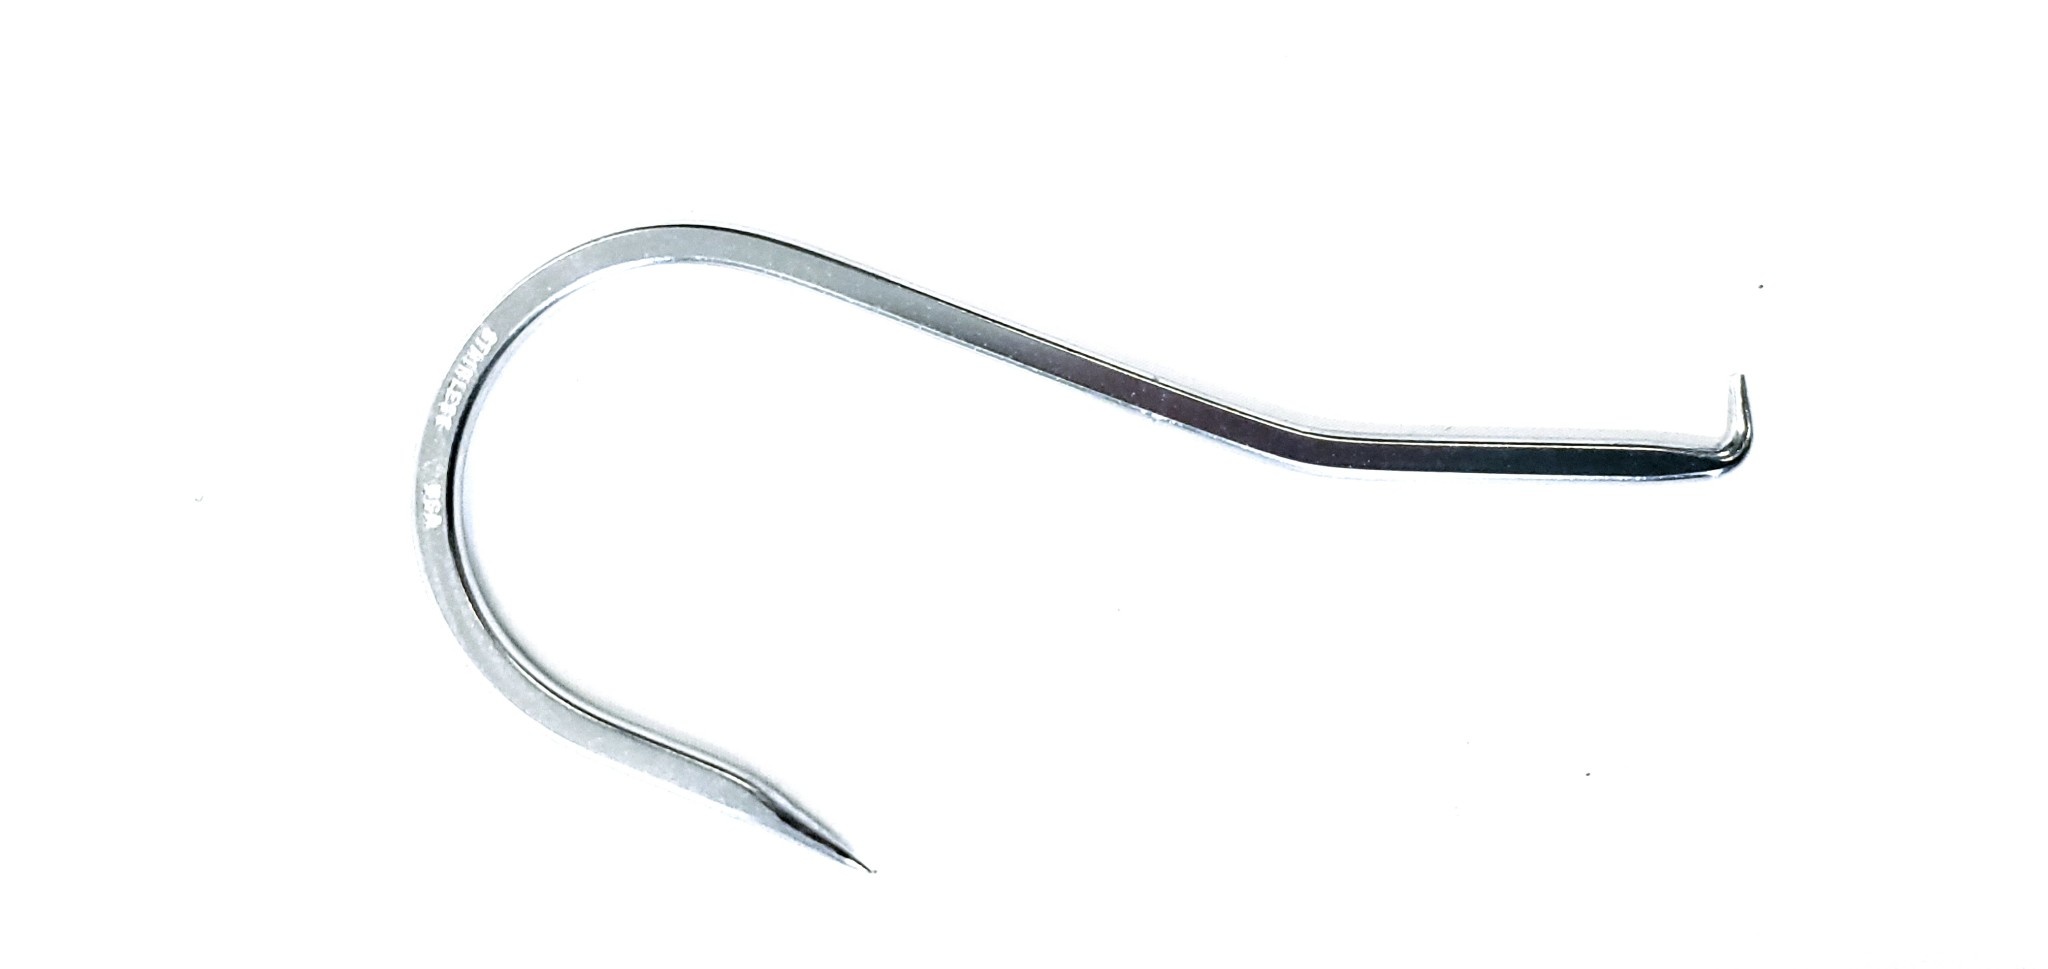 STAINLESS STEEL GAFF HOOK 3IN - Tightlines Tackle Co.